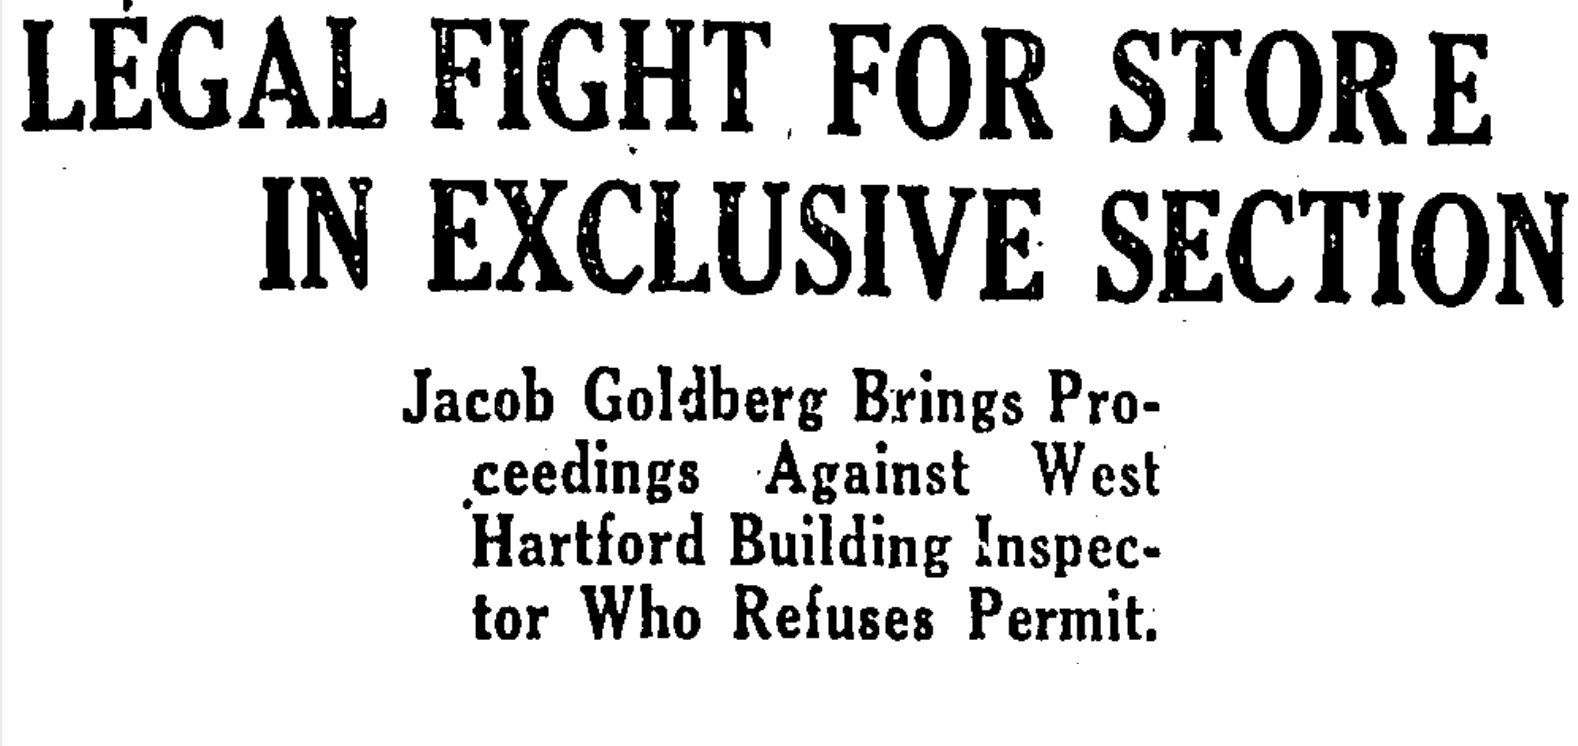 The controversy over granting a building permit to Jewish Hartford grocer Jacob Goldberg grabbed larger headlines than a similar conflict involving local Protestant real estate businessman Fred Kenyon. Source: Hartford Courant, February 7, 1923.